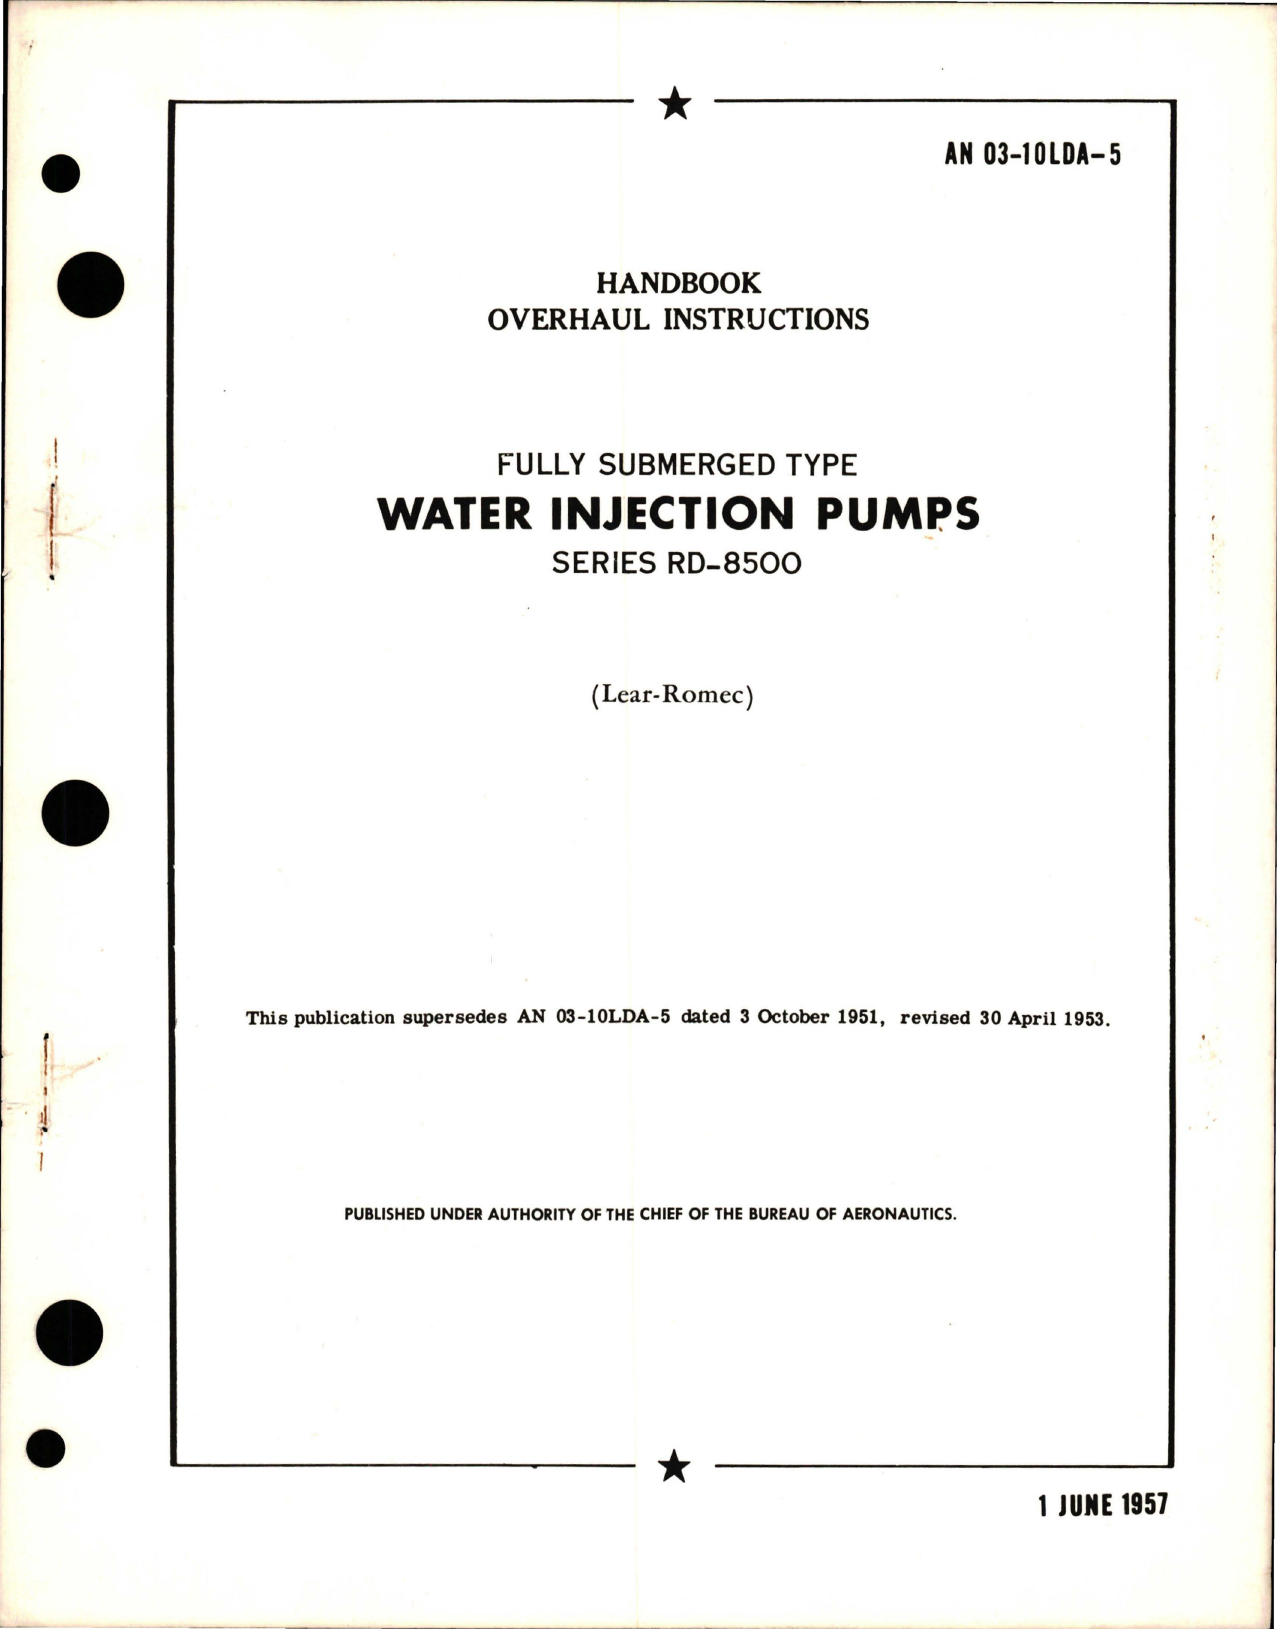 Sample page 1 from AirCorps Library document: Overhaul Instructions for Fully Submerged Type Water Injection Pumps - RD-8500 Series